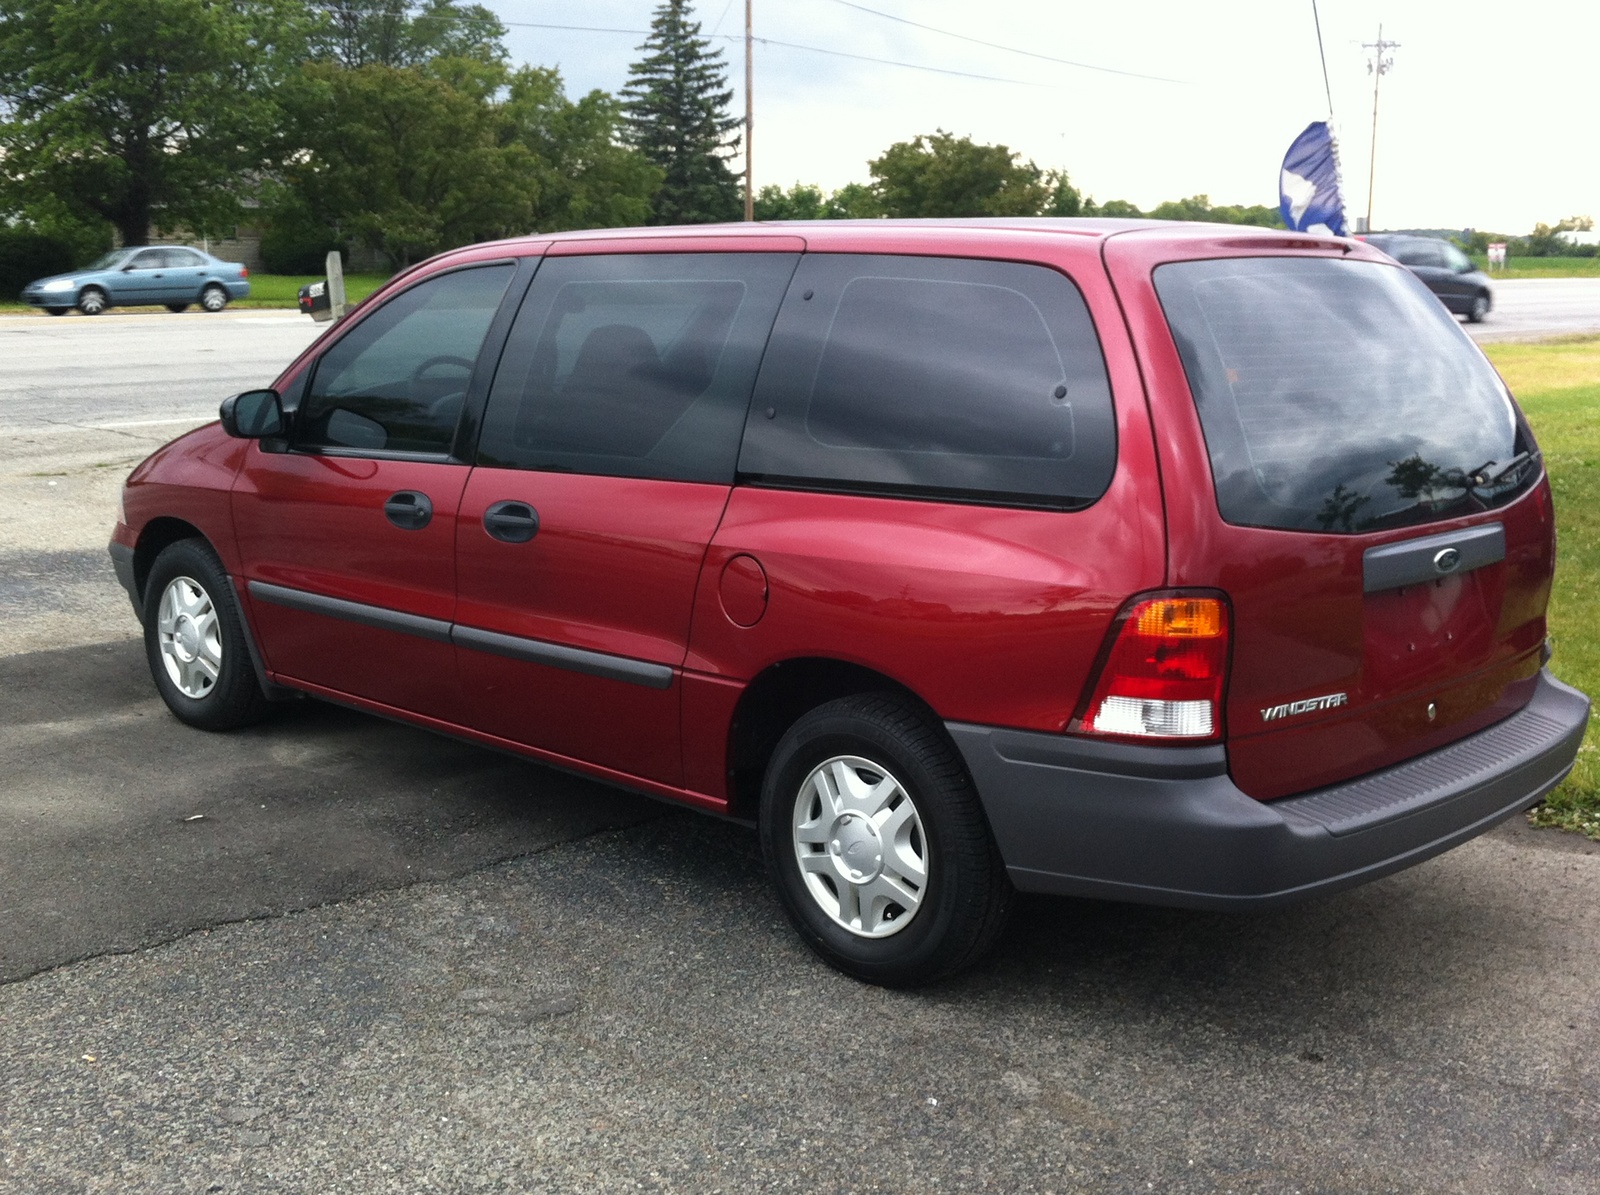 Ford Windstar 1999 #6